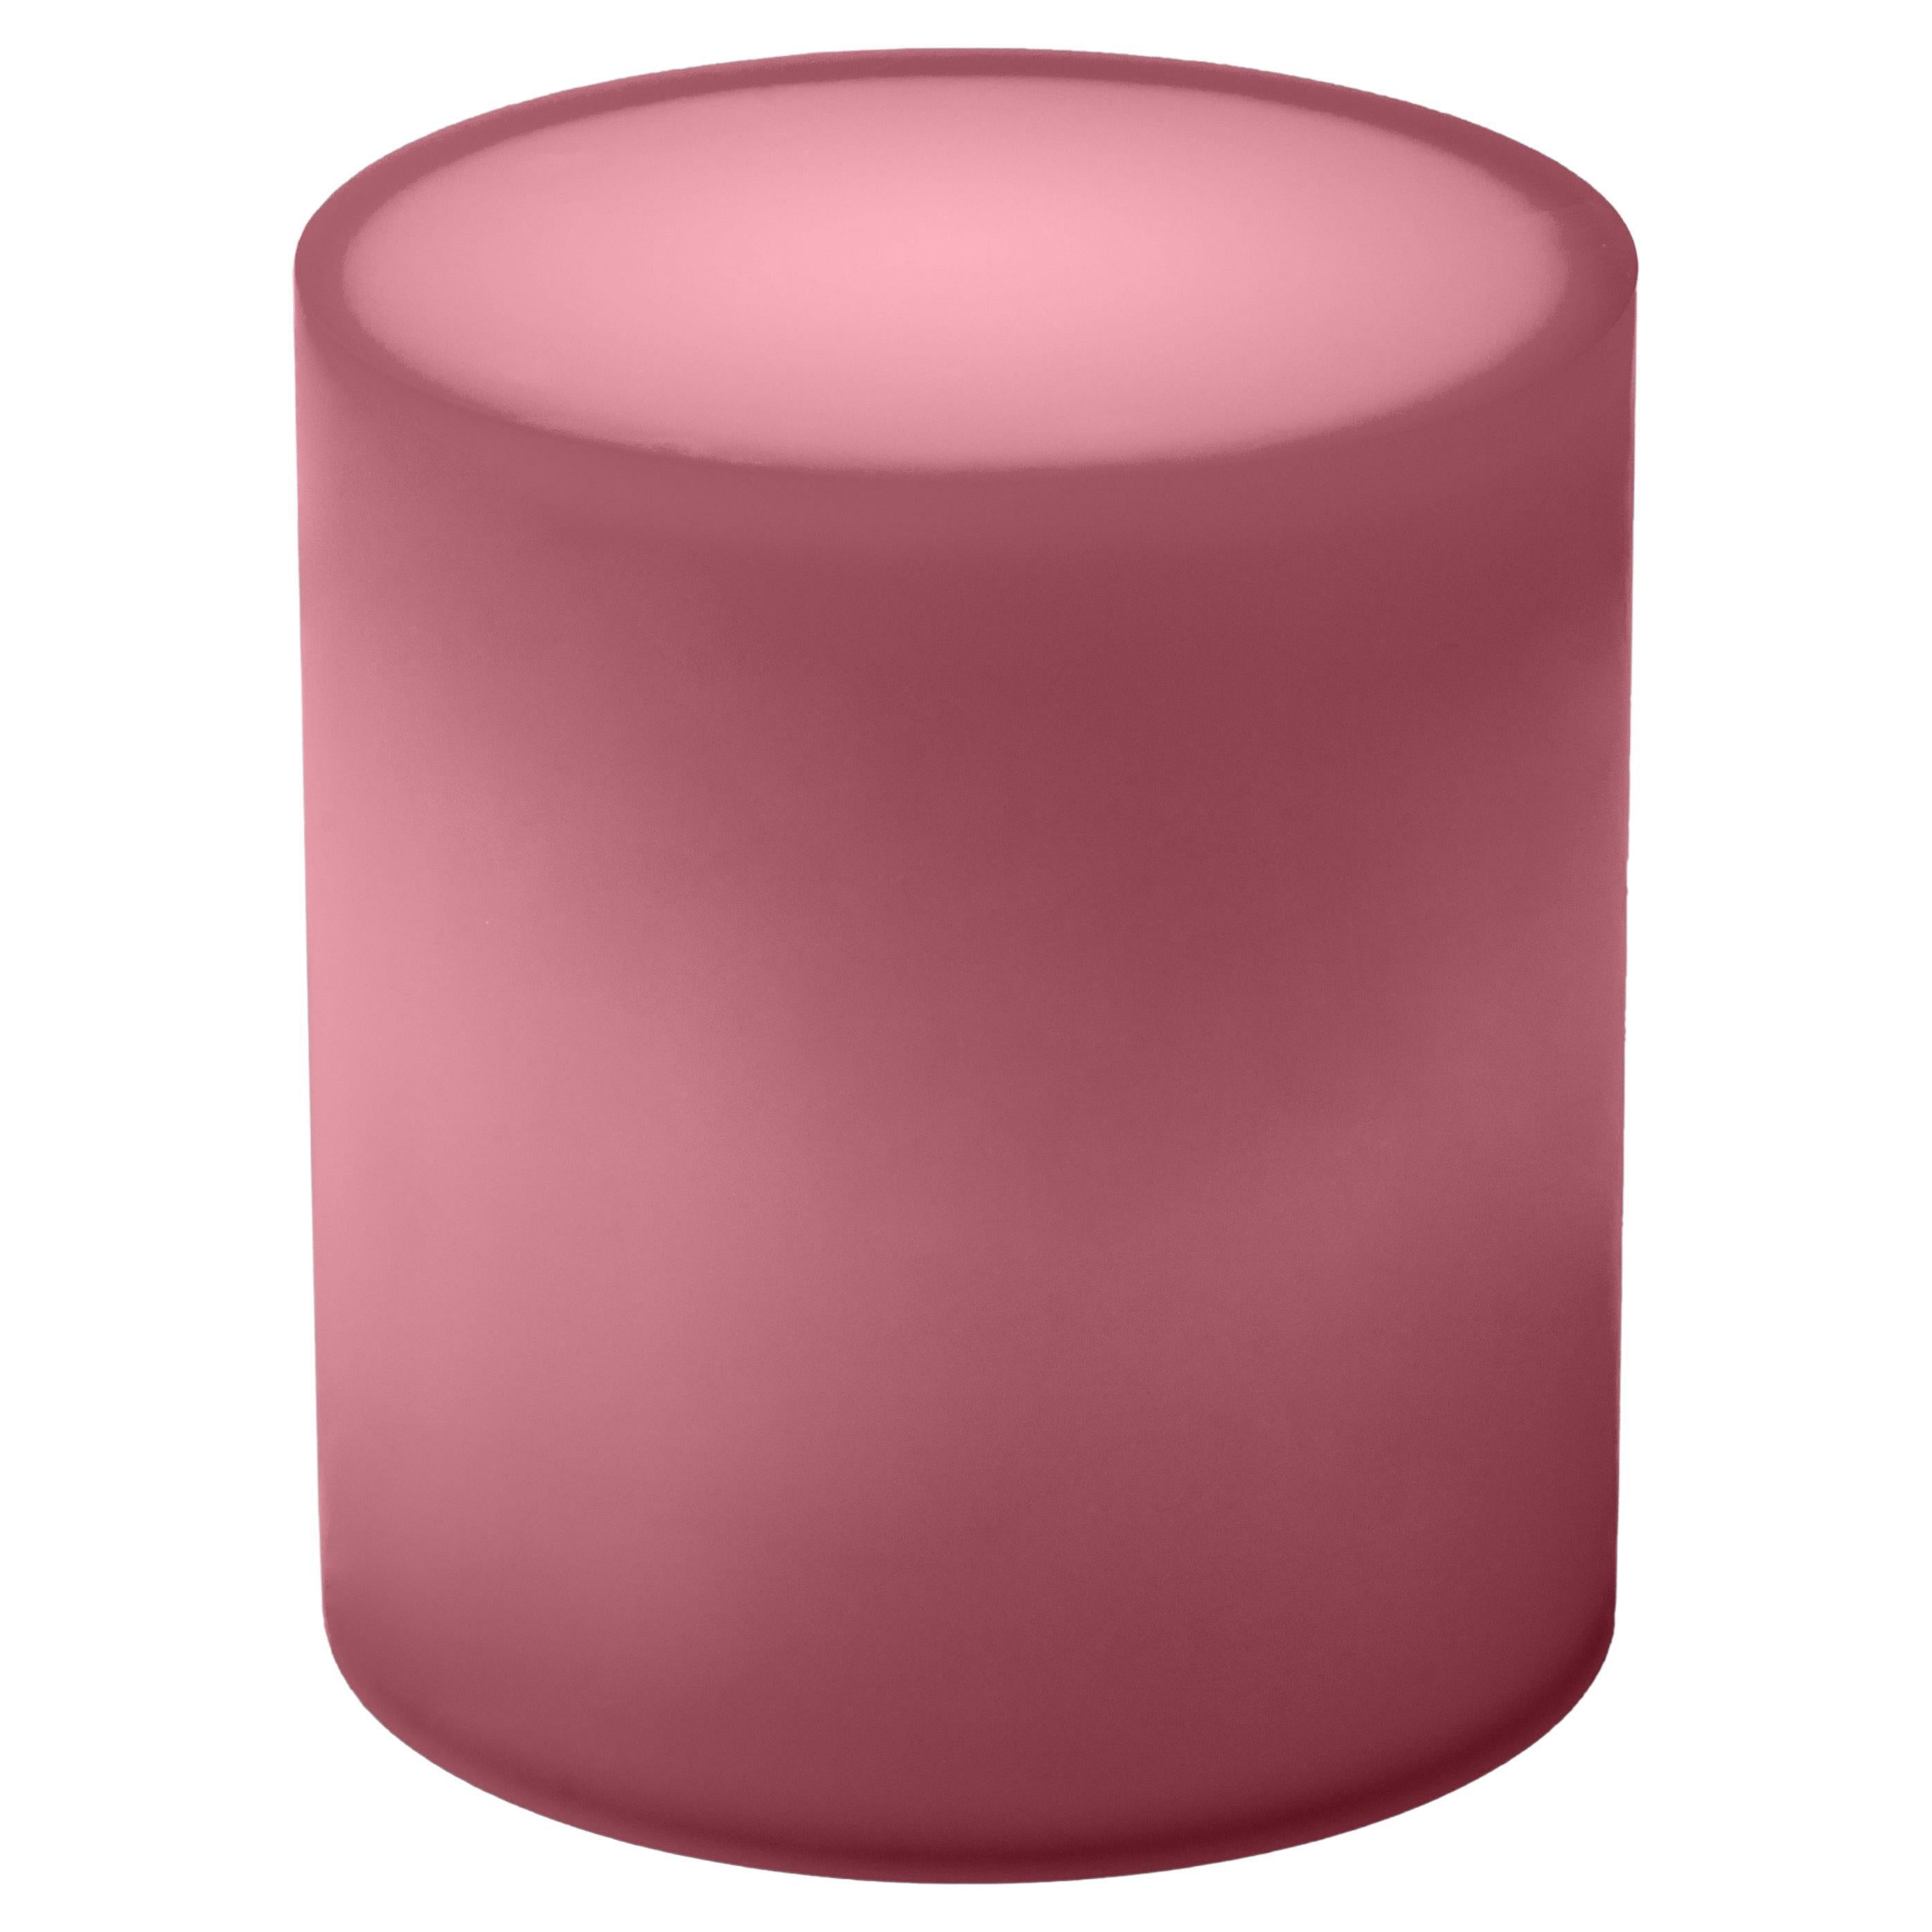 Drum Resin Side Table/Stool In Dusty Pink by Facture, REP by Tuleste Factory For Sale